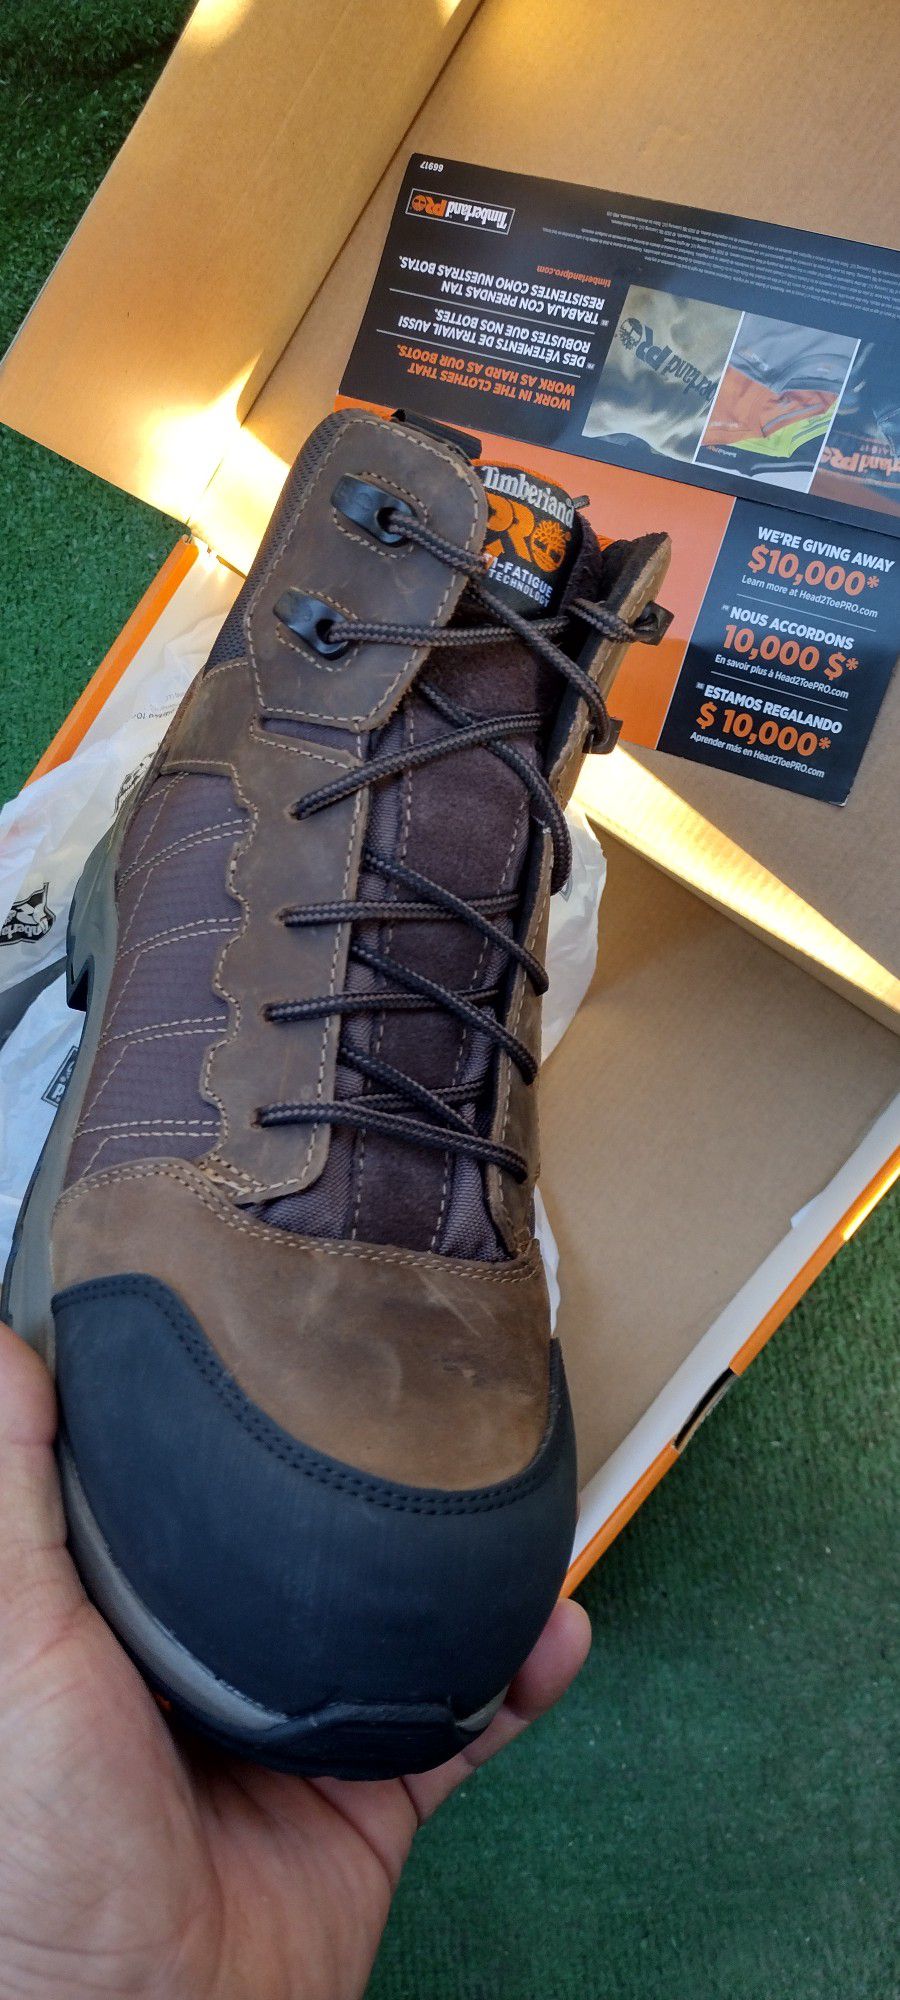 TIMBERLAND PRO PAYLOAD MENS BOOTS CONSTRUCCIÓN COMPOSITE TOE SIZE 10...10.5..11 EN LYNWOOD 